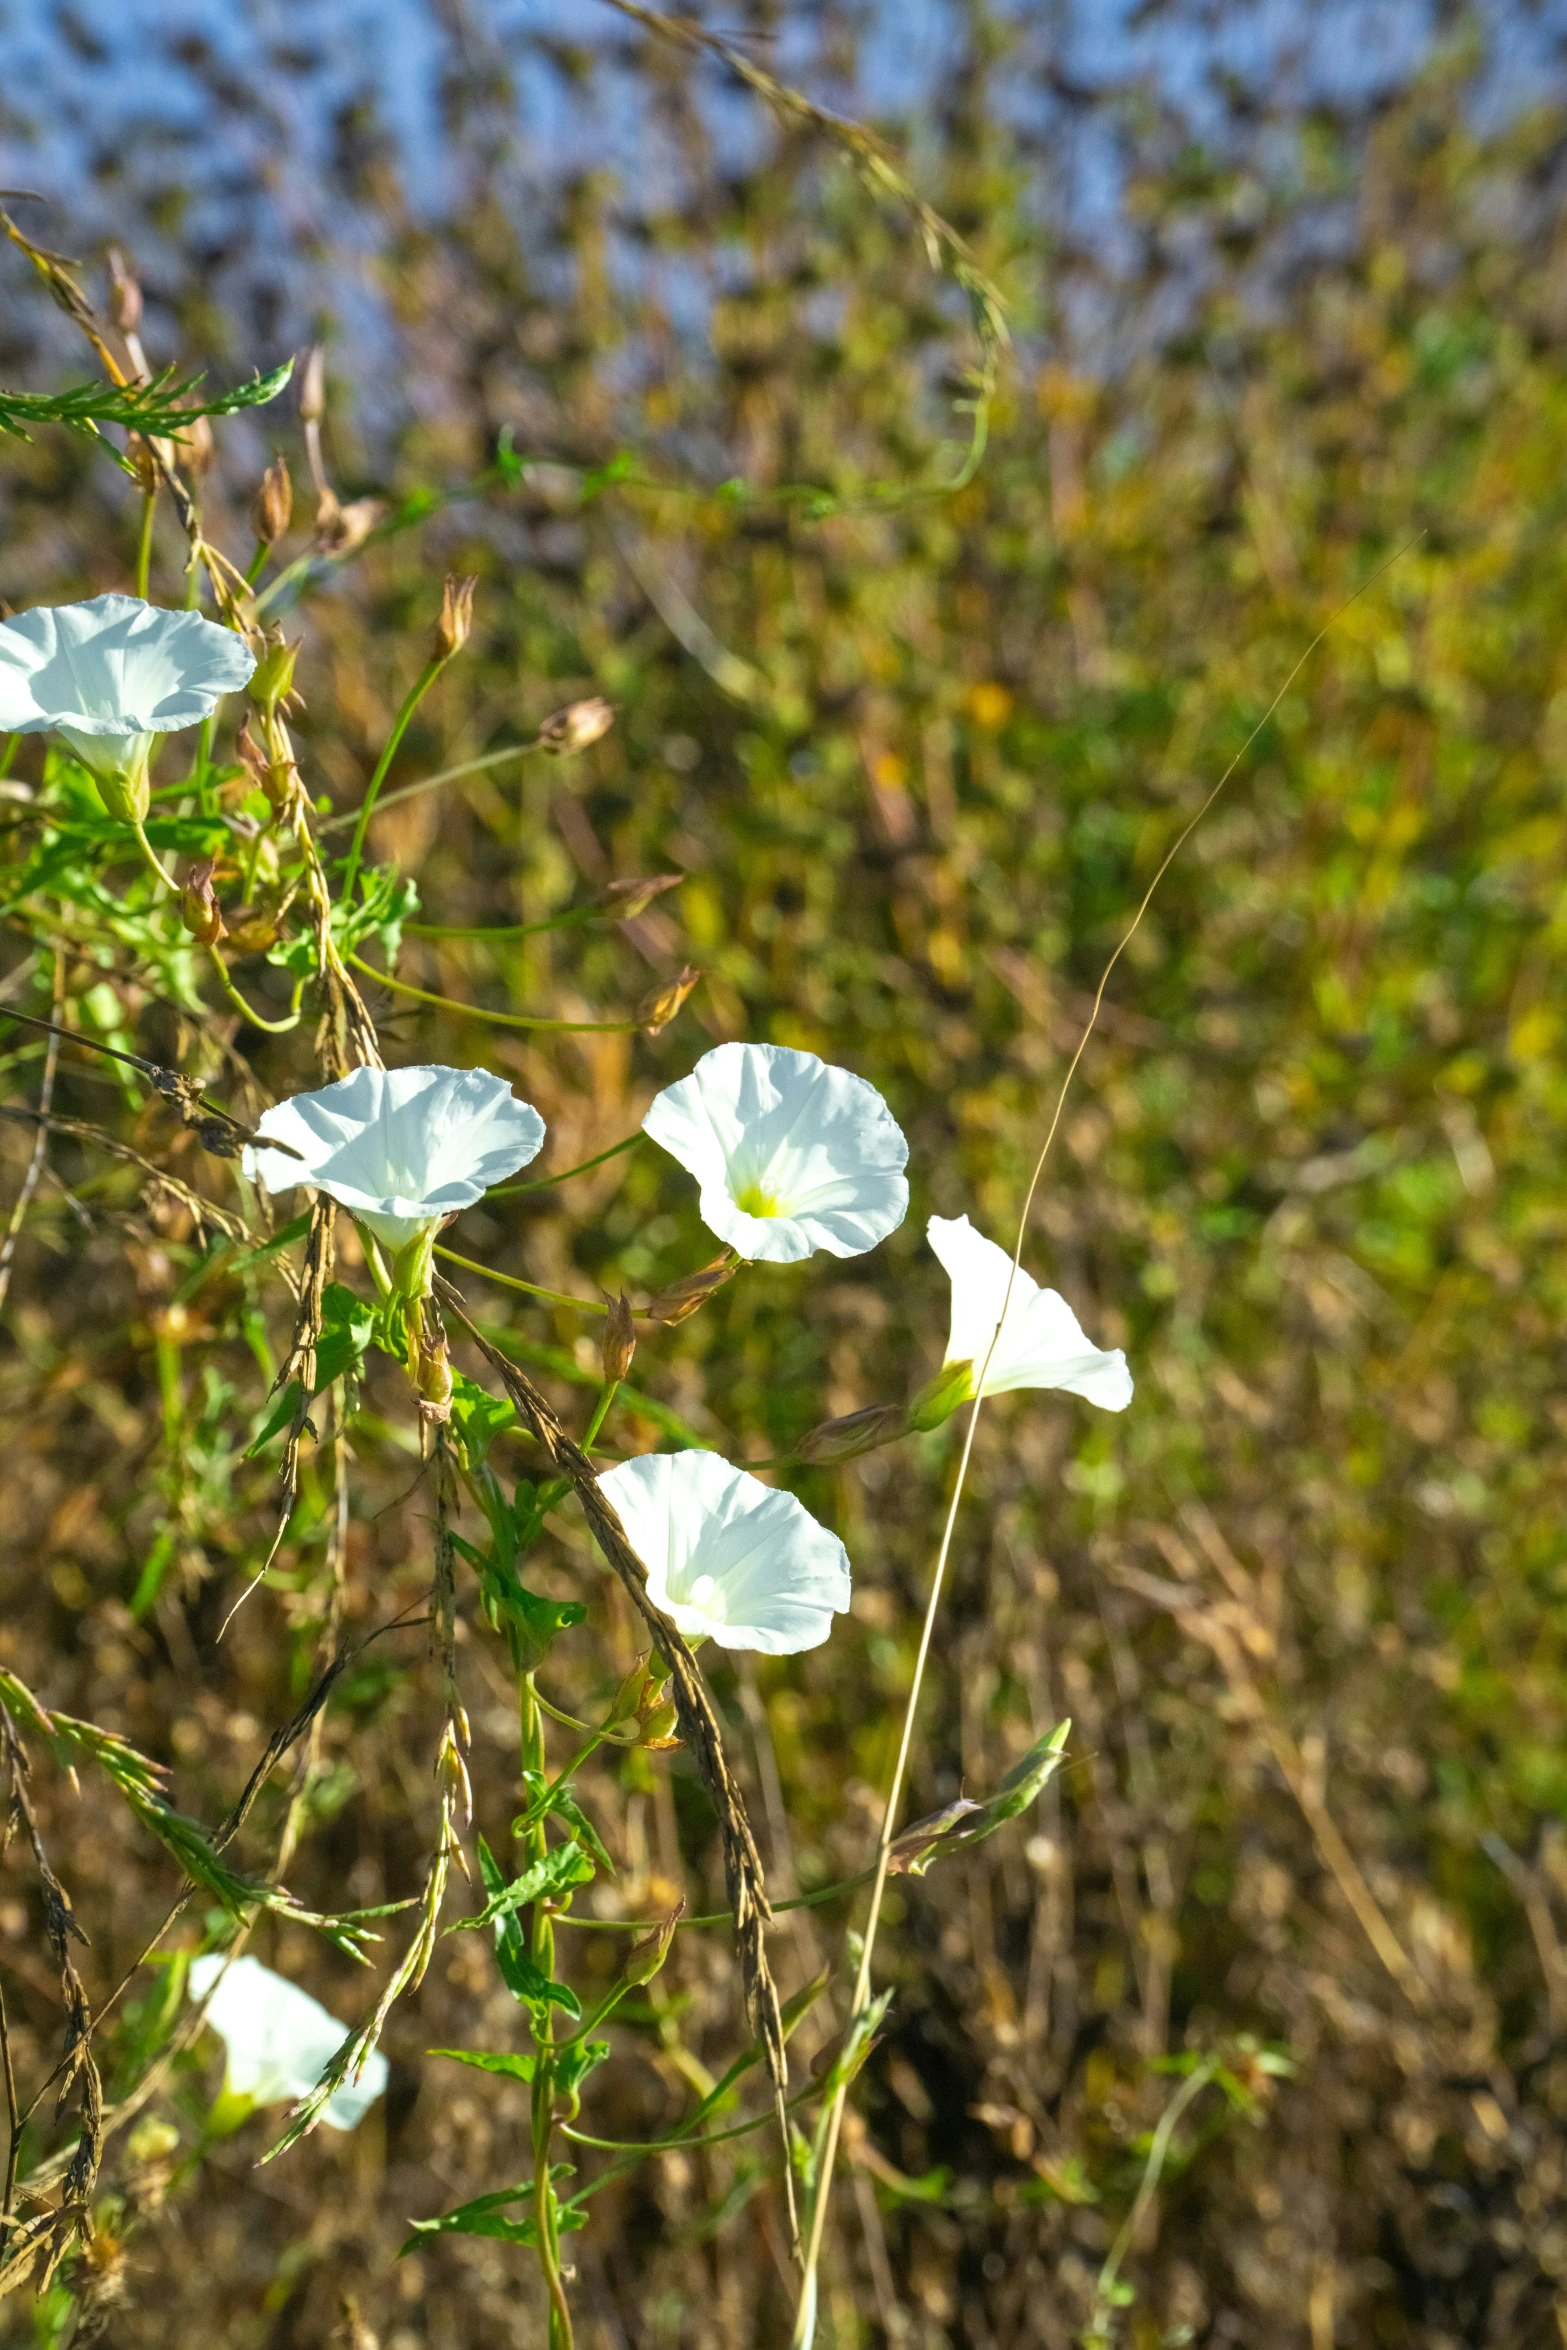 white flowers are blooming in a grassy area